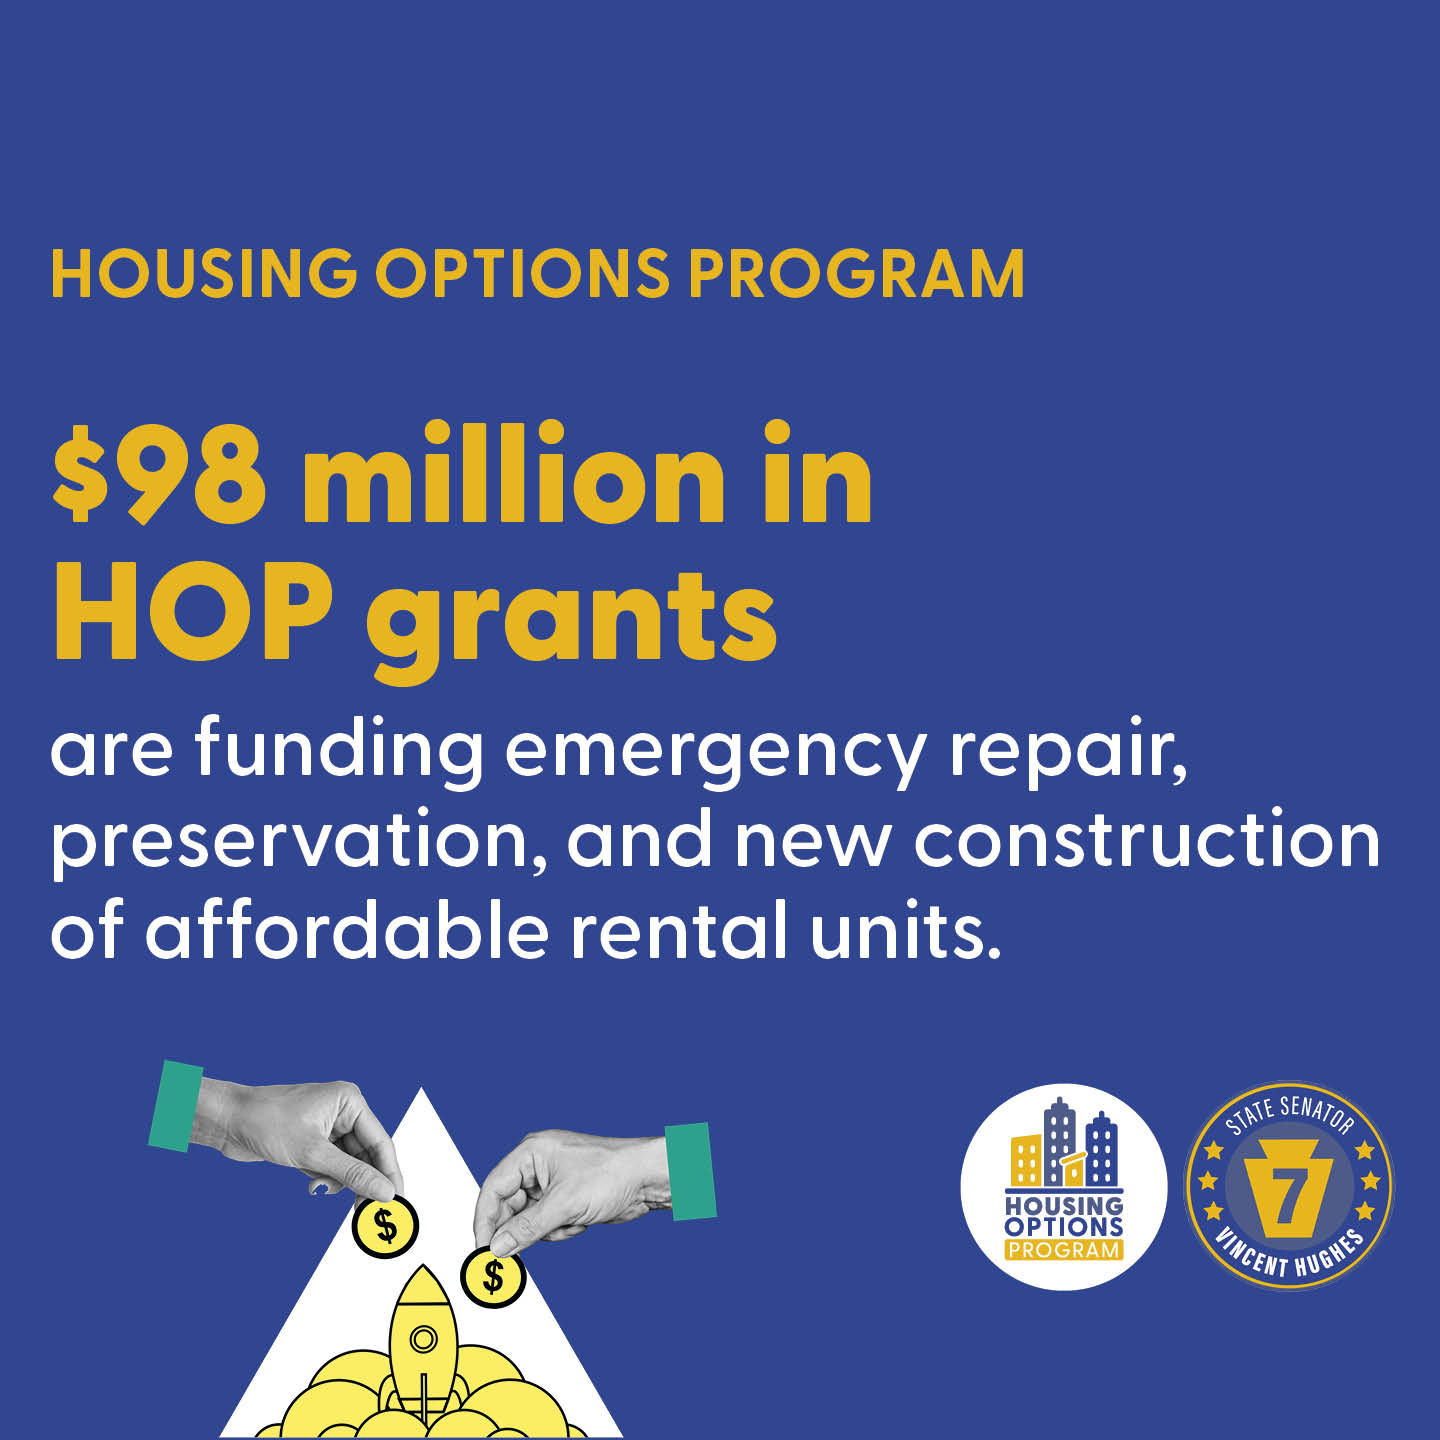 HOUSING OPTIONS PROGRAM - $98 million in HOP grants are funding emergency repair, preservation, and new construction of affordable rental units.